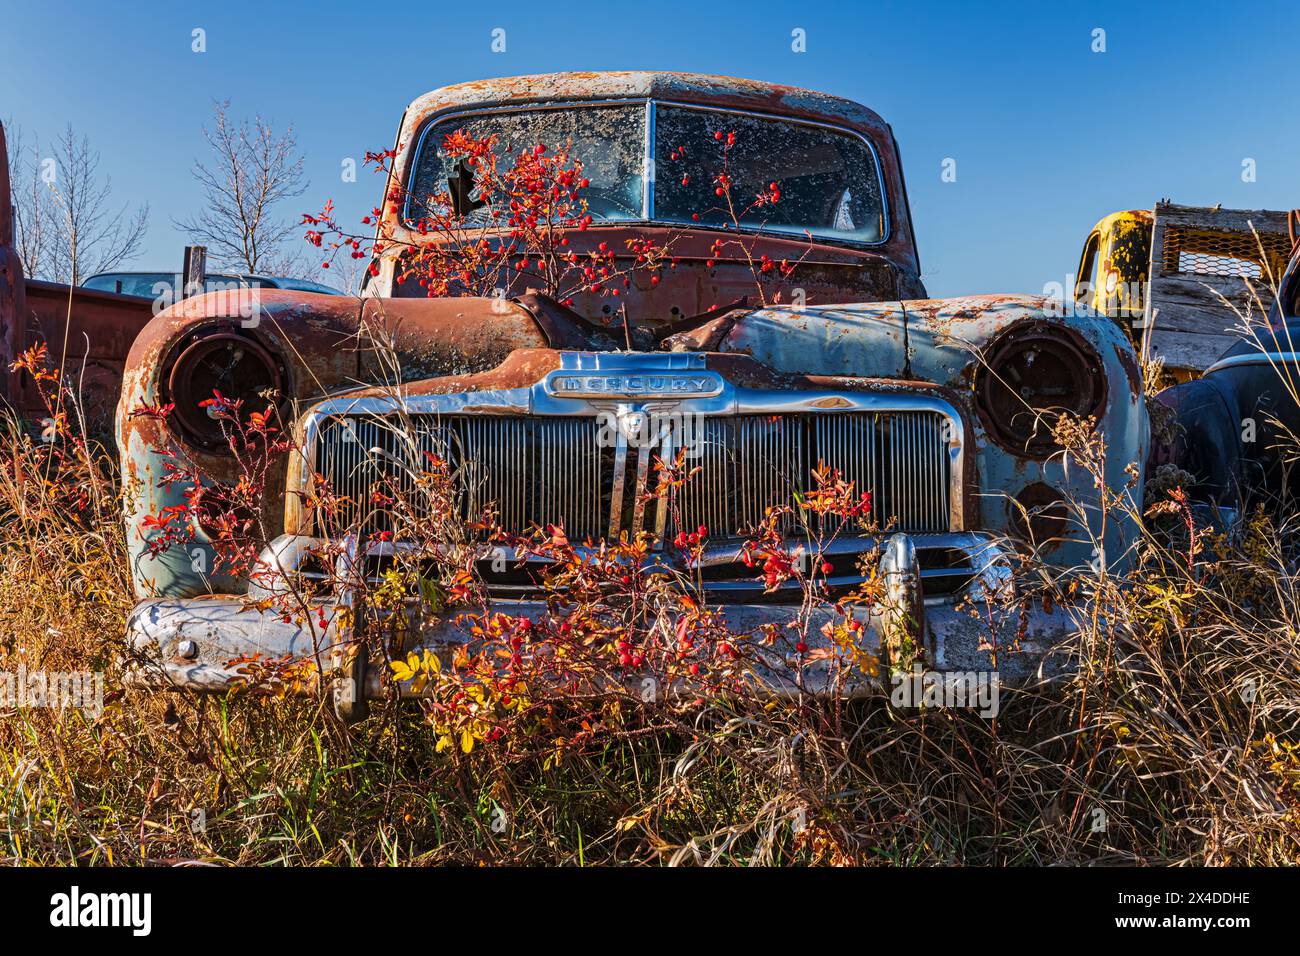 Canada, Manitoba, St. Lupicin. Rusted vintage Mercury car. (Editorial Use Only) Stock Photo